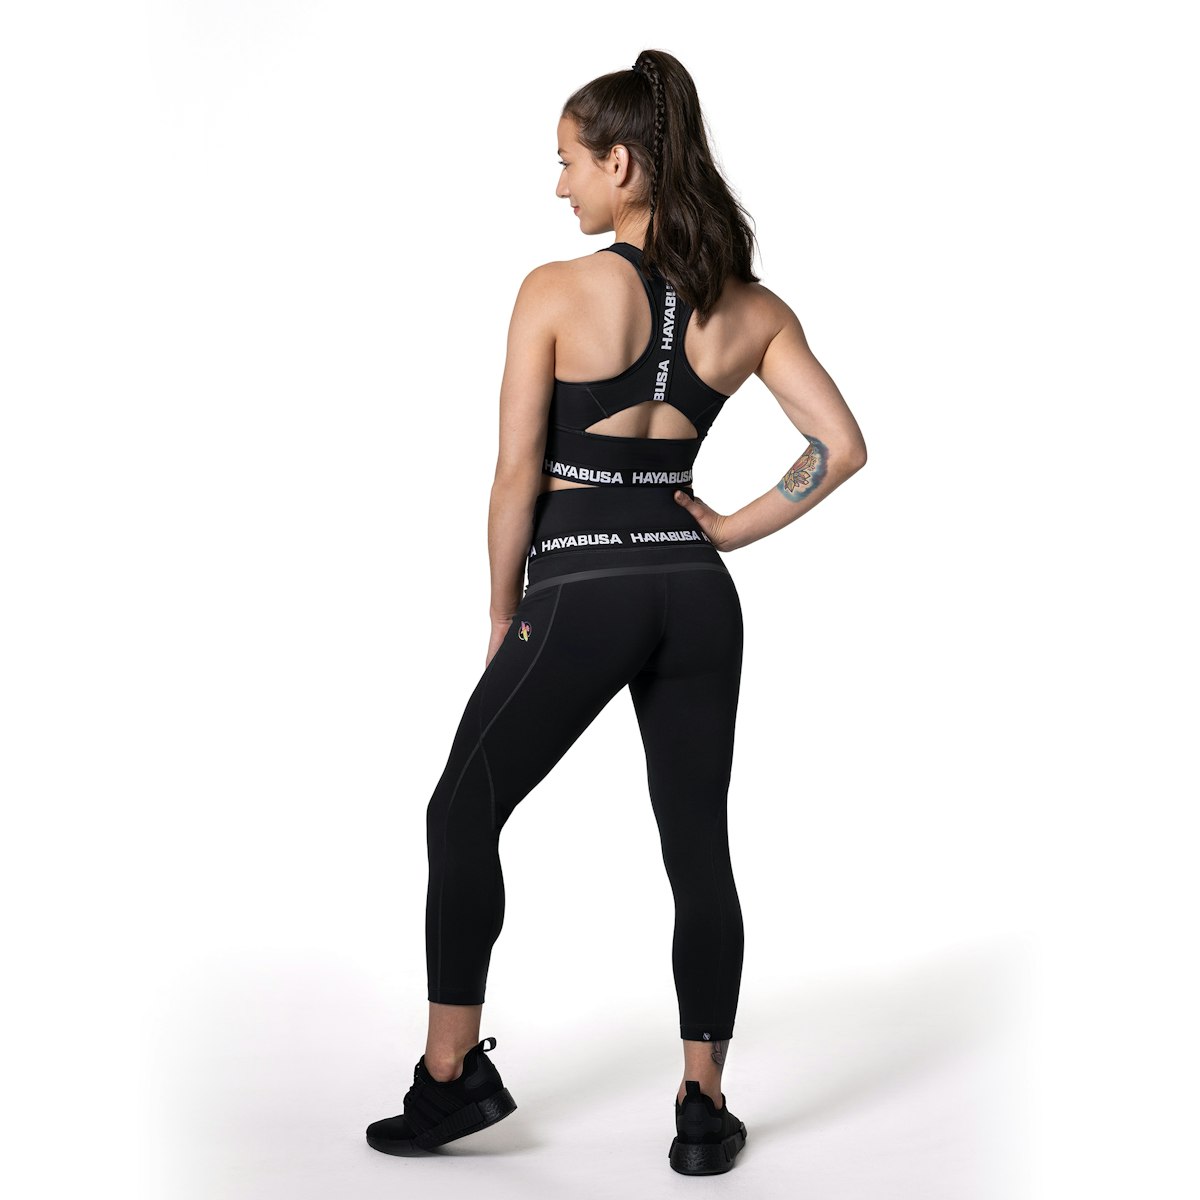 shoppers are loving this sports bra with hidden phone pocket for  hands free workouts